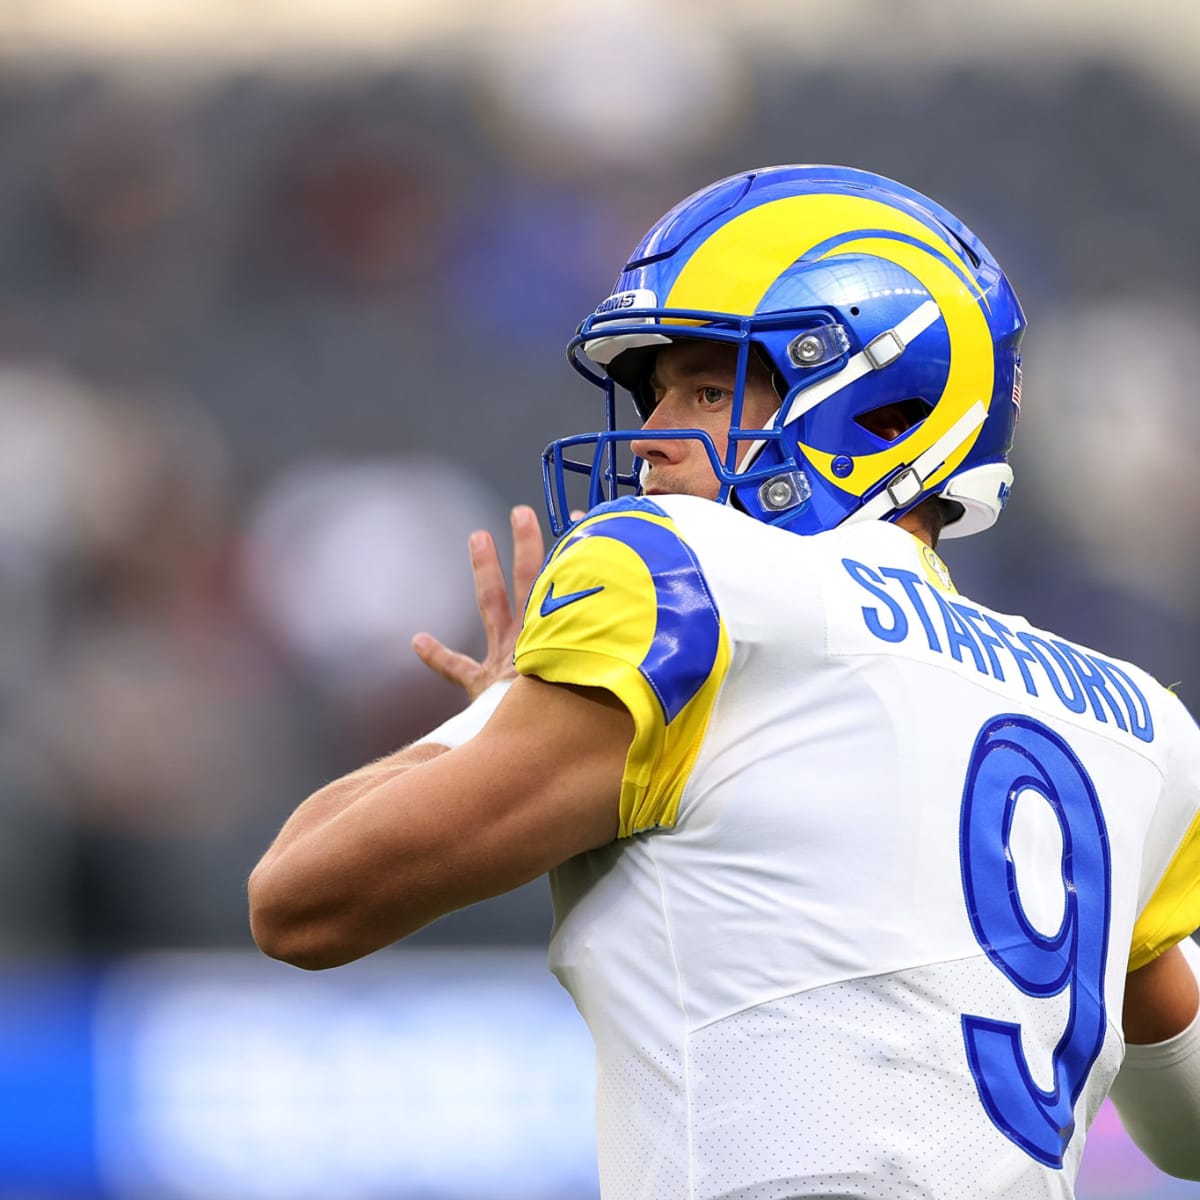 Time for a Rams throwback jersey change? - Turf Show Times